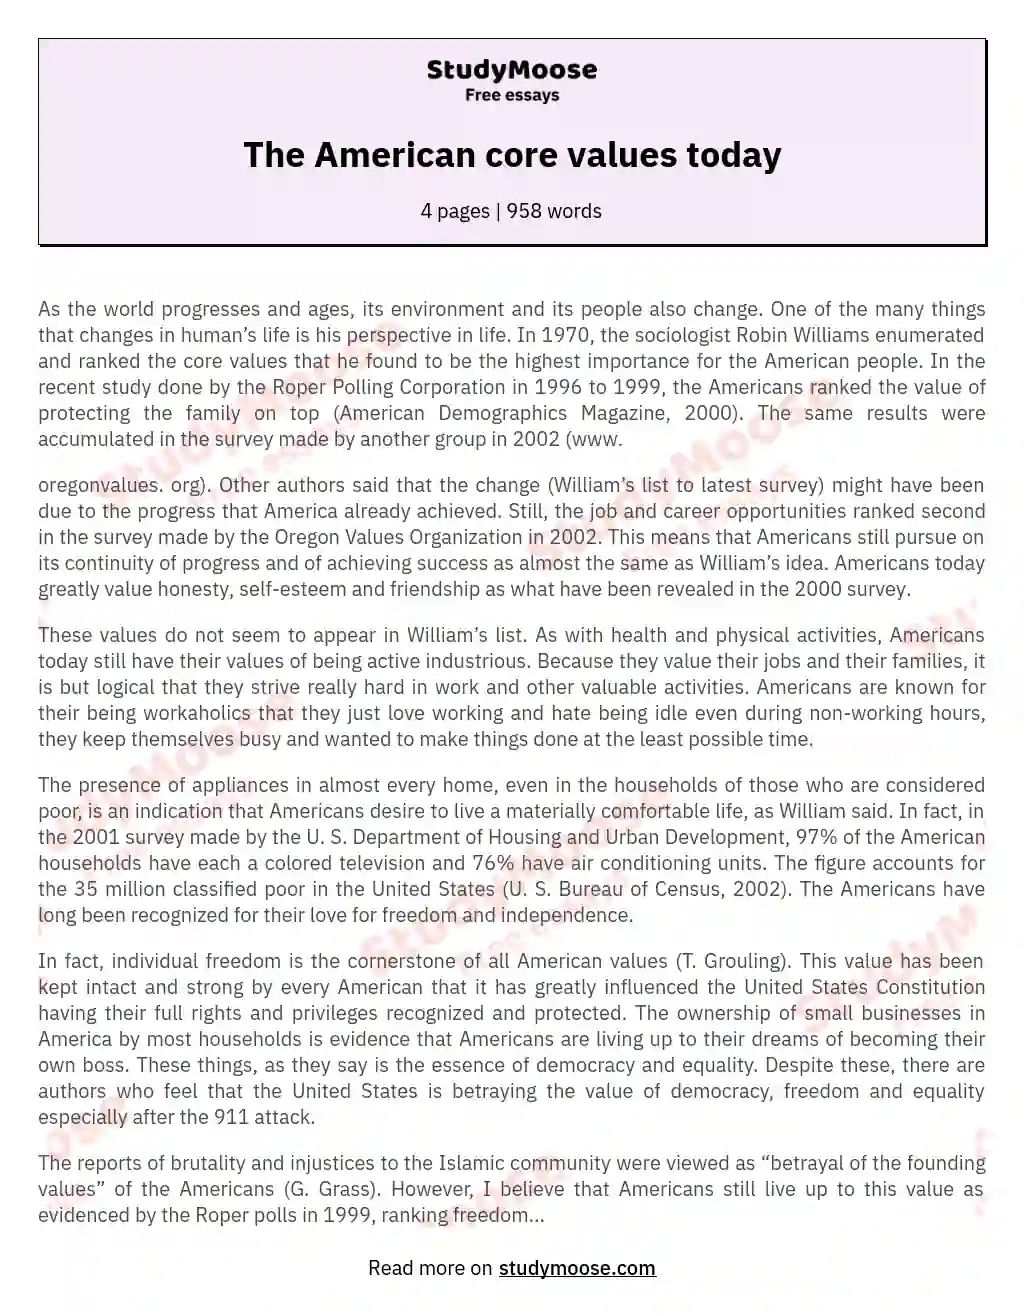 The American core values today essay